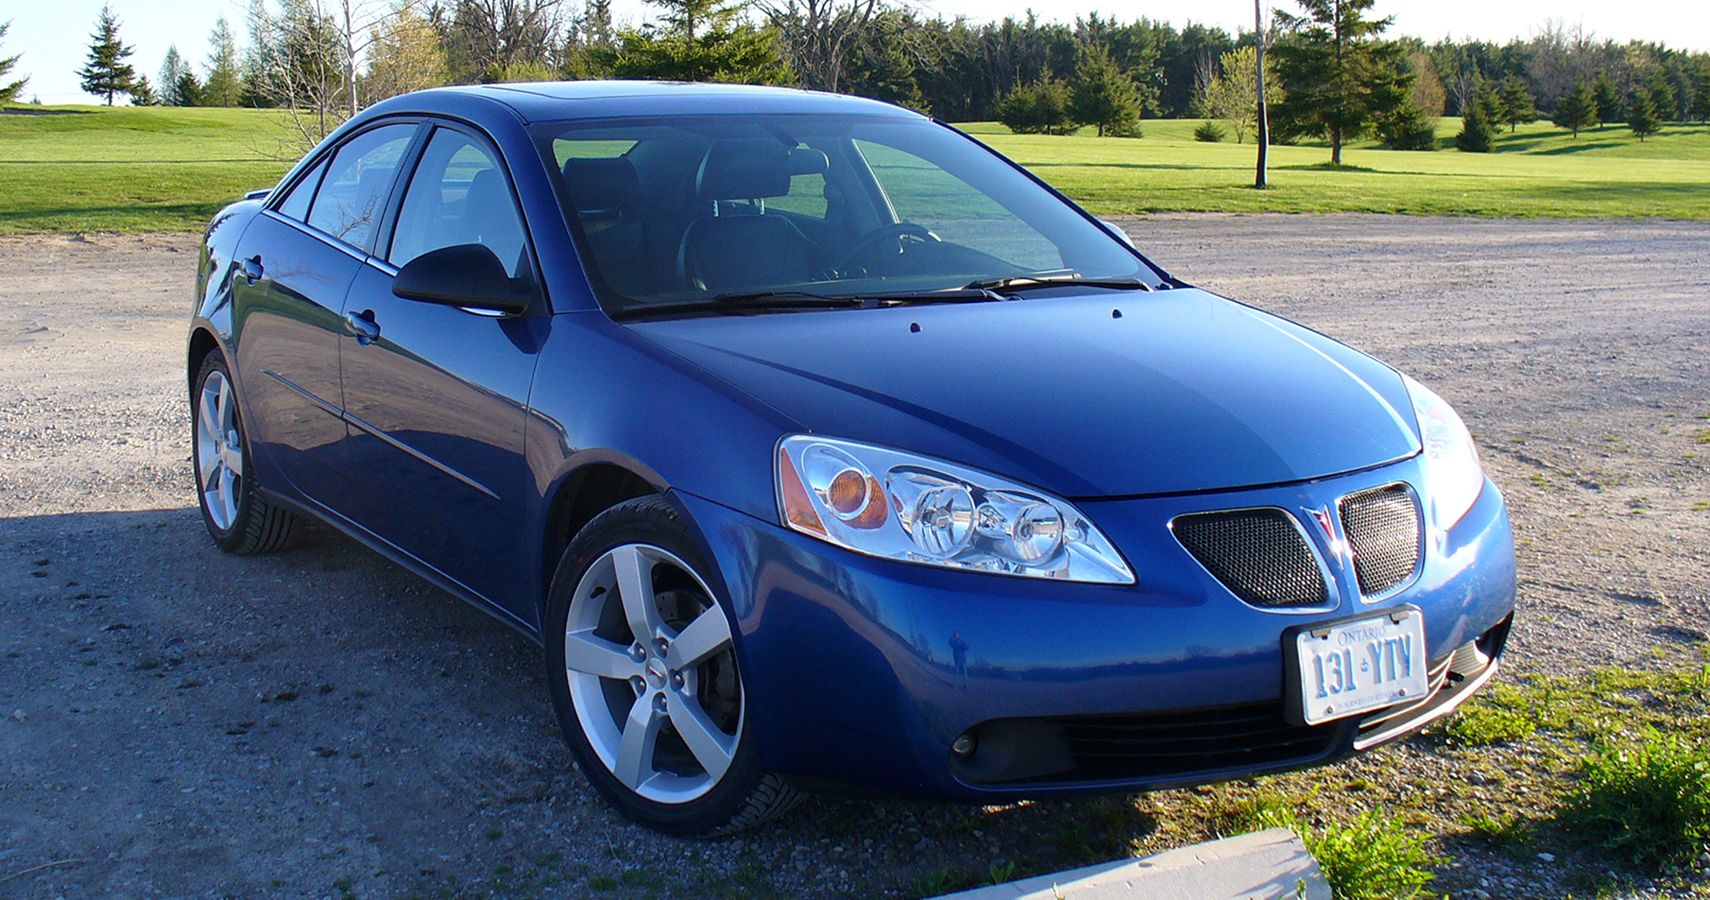 2005-2010 Pontiac G6: The Last Of The Greats